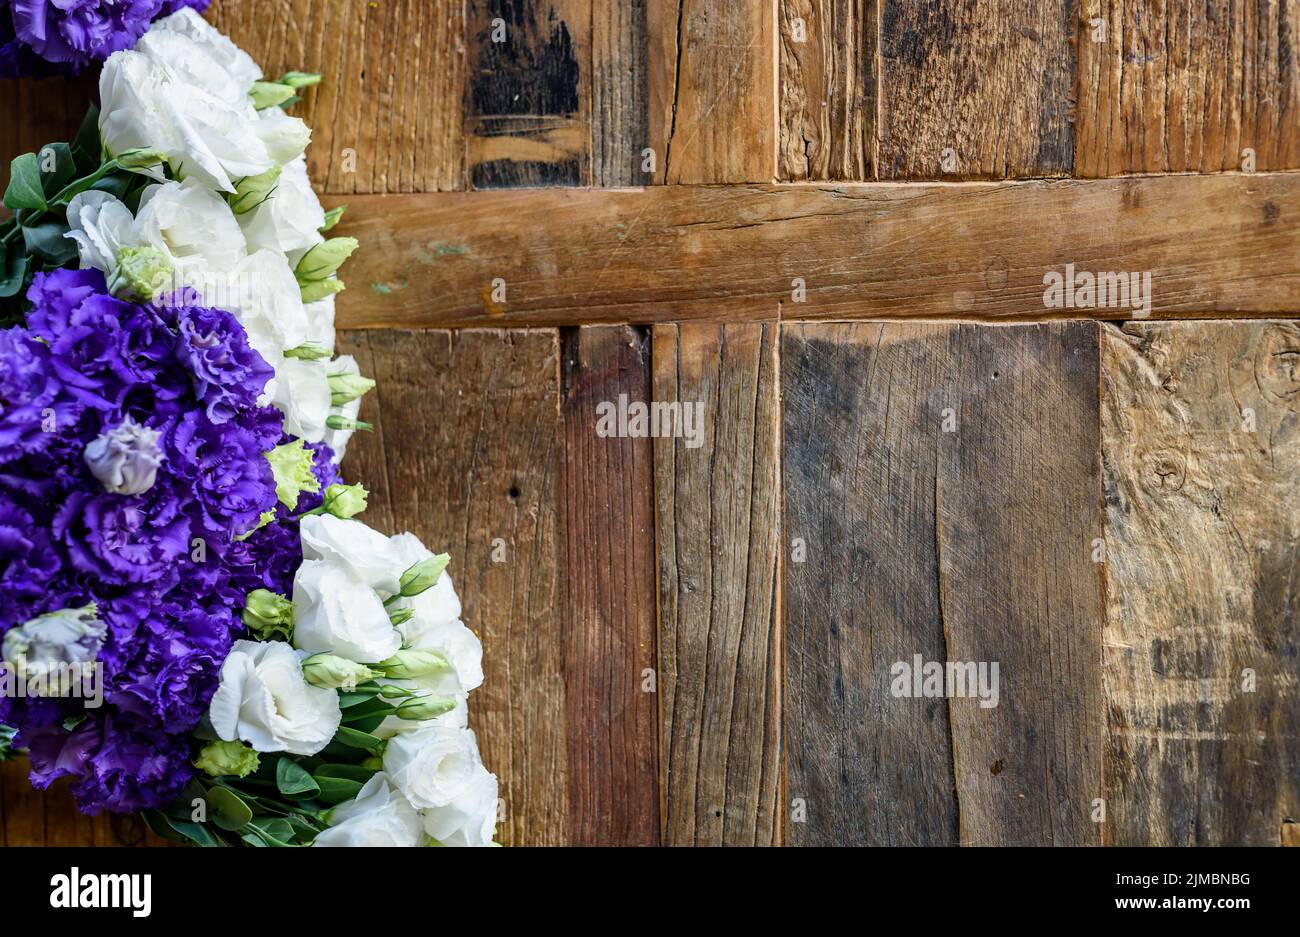 Purple and white contrasting flowers placed on wooden surface. Stock Photo